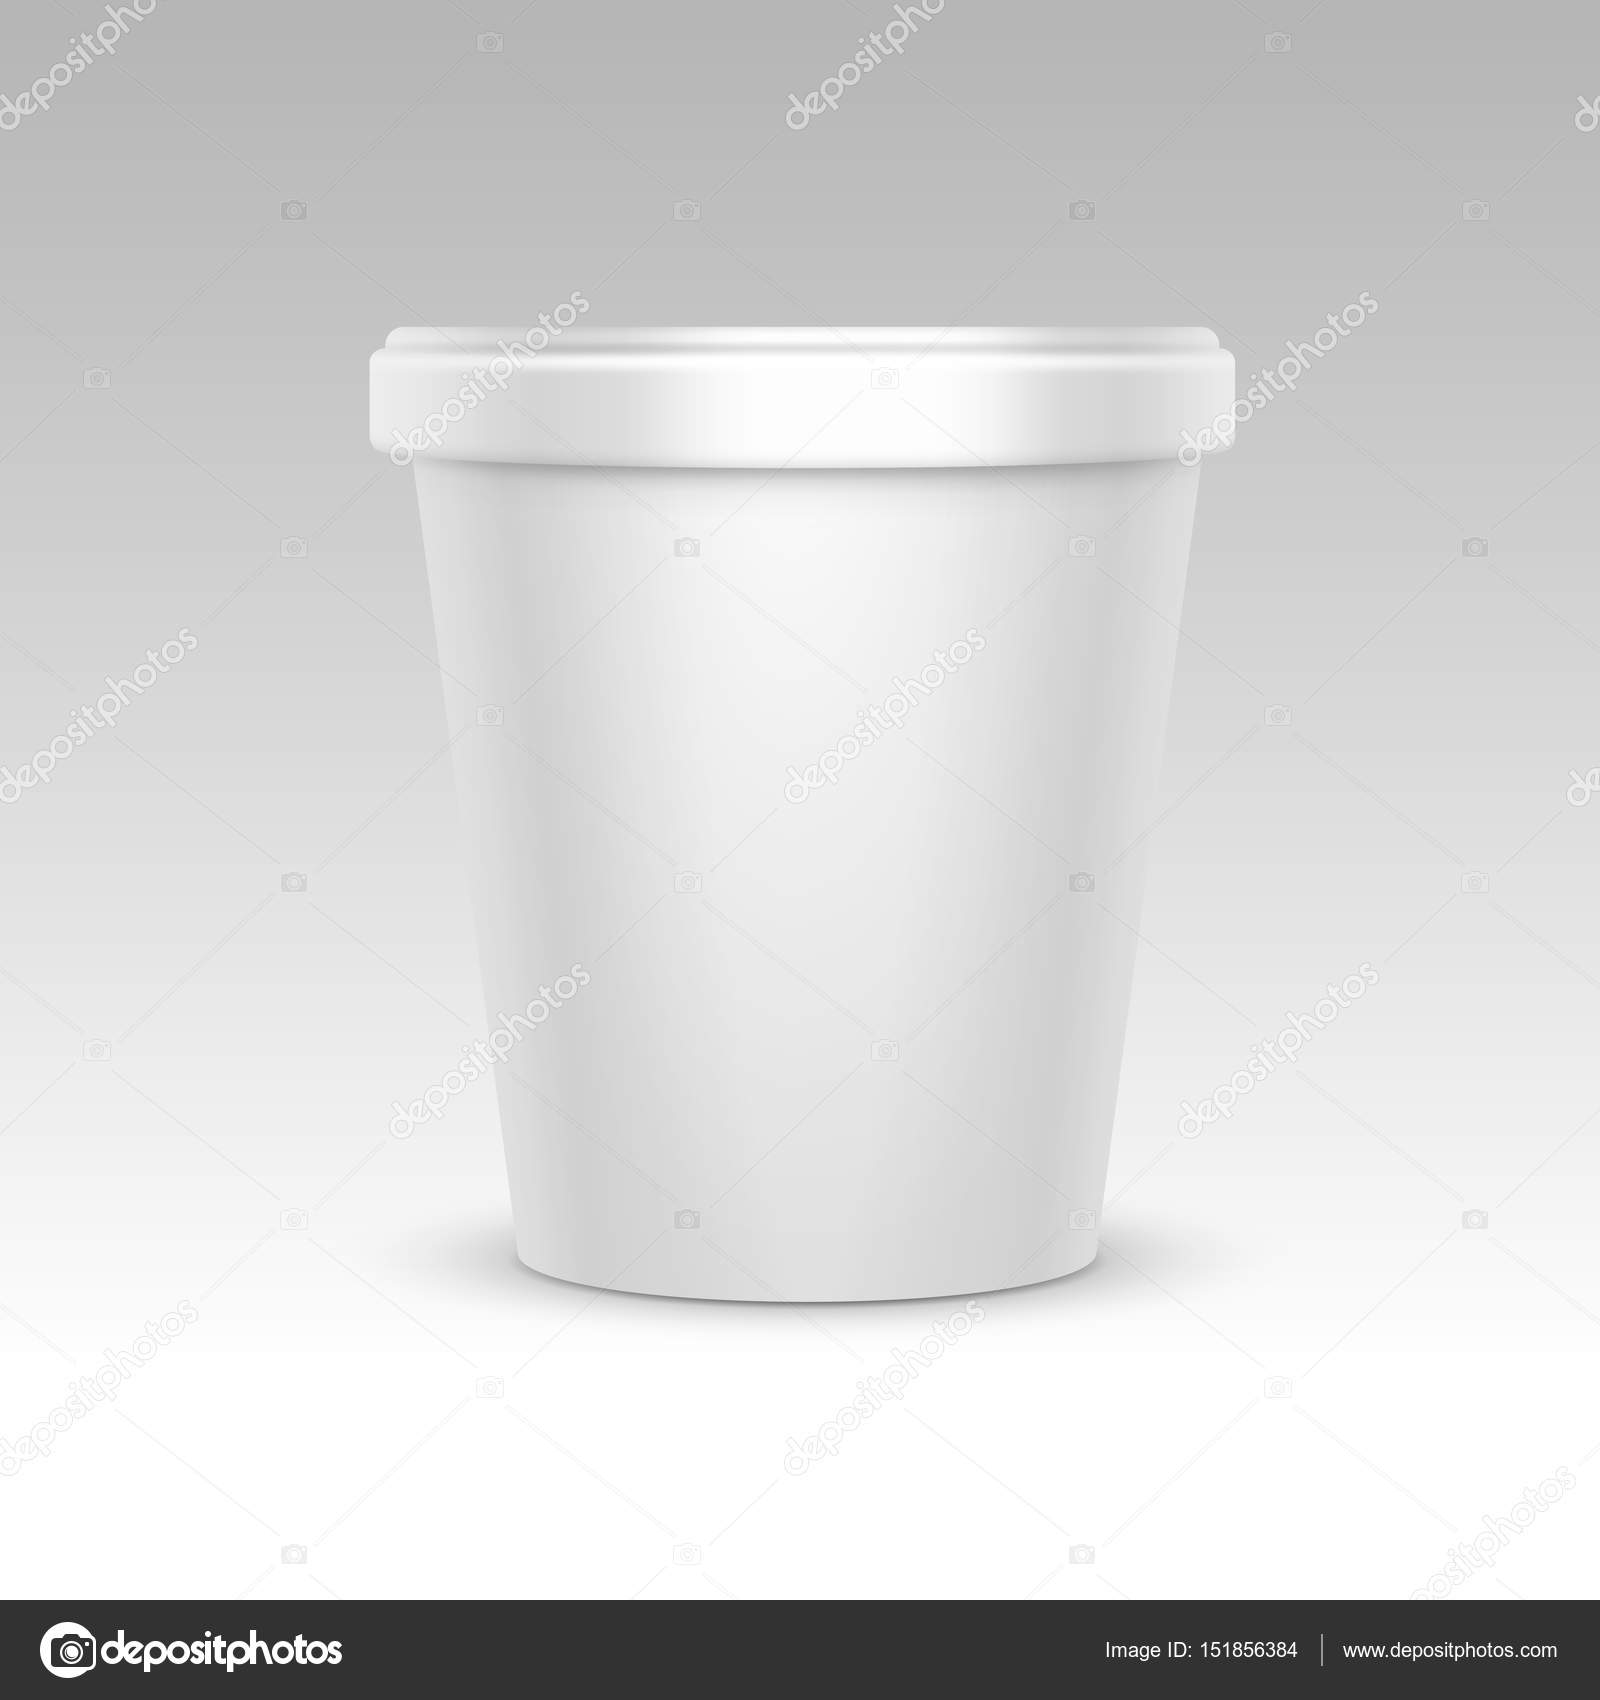 White Food Plastic Tub Bucket Container With Handle For Dessert, Yogurt, Ice  Cream, Sour Sream Stock Vector by ©Mr.Pack 48004897